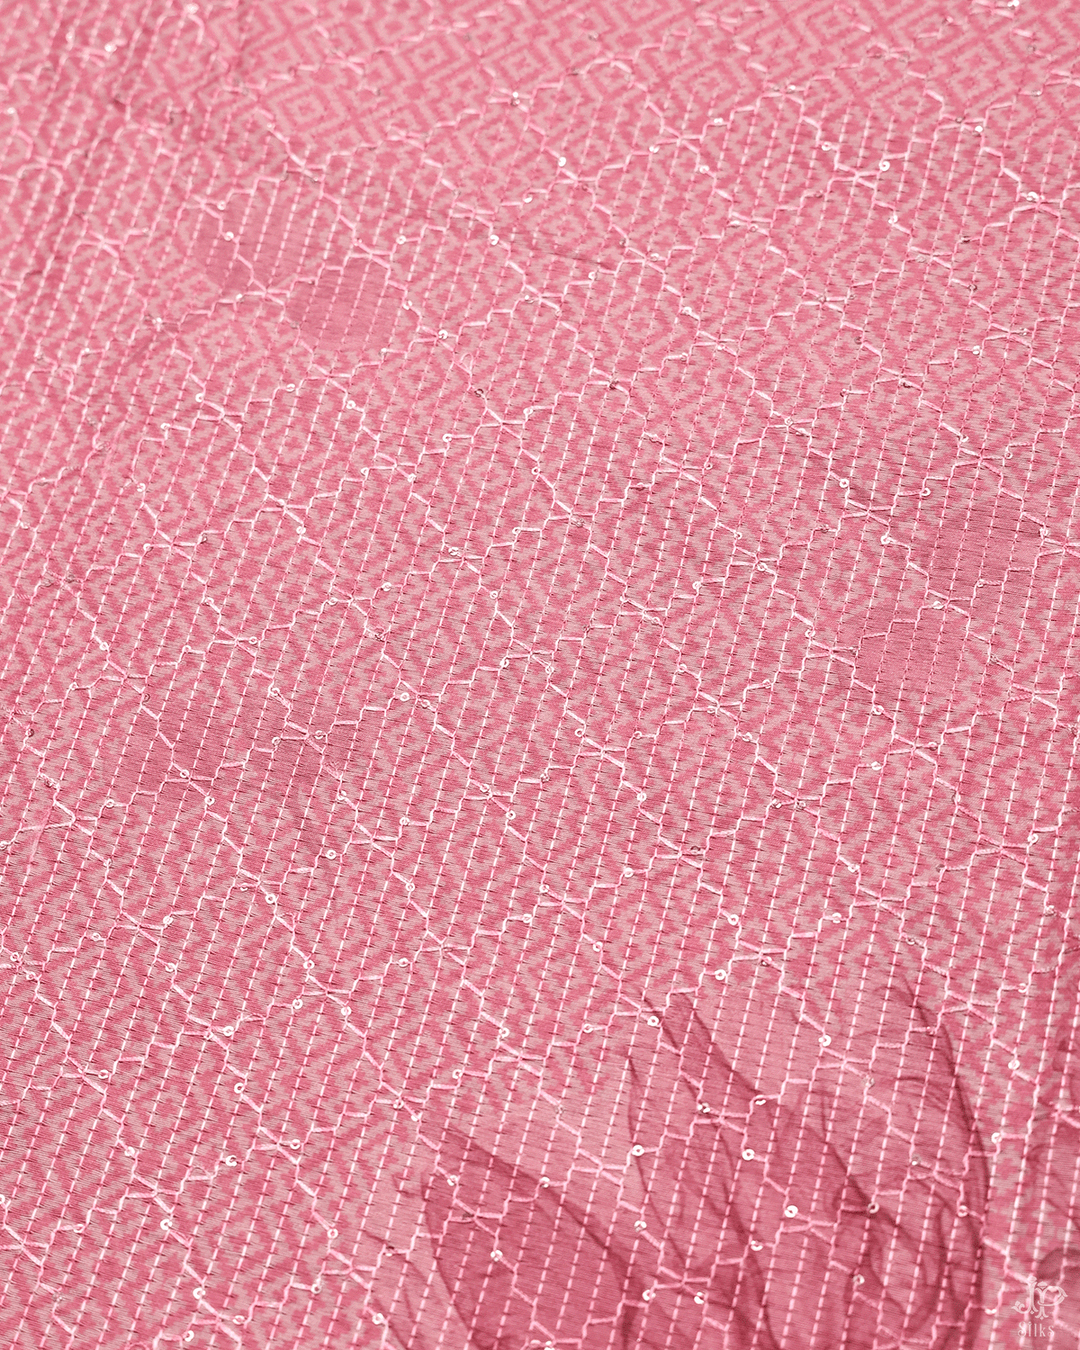 Onion Pink Unstitched Chudidhar Material - D5276 - View 5